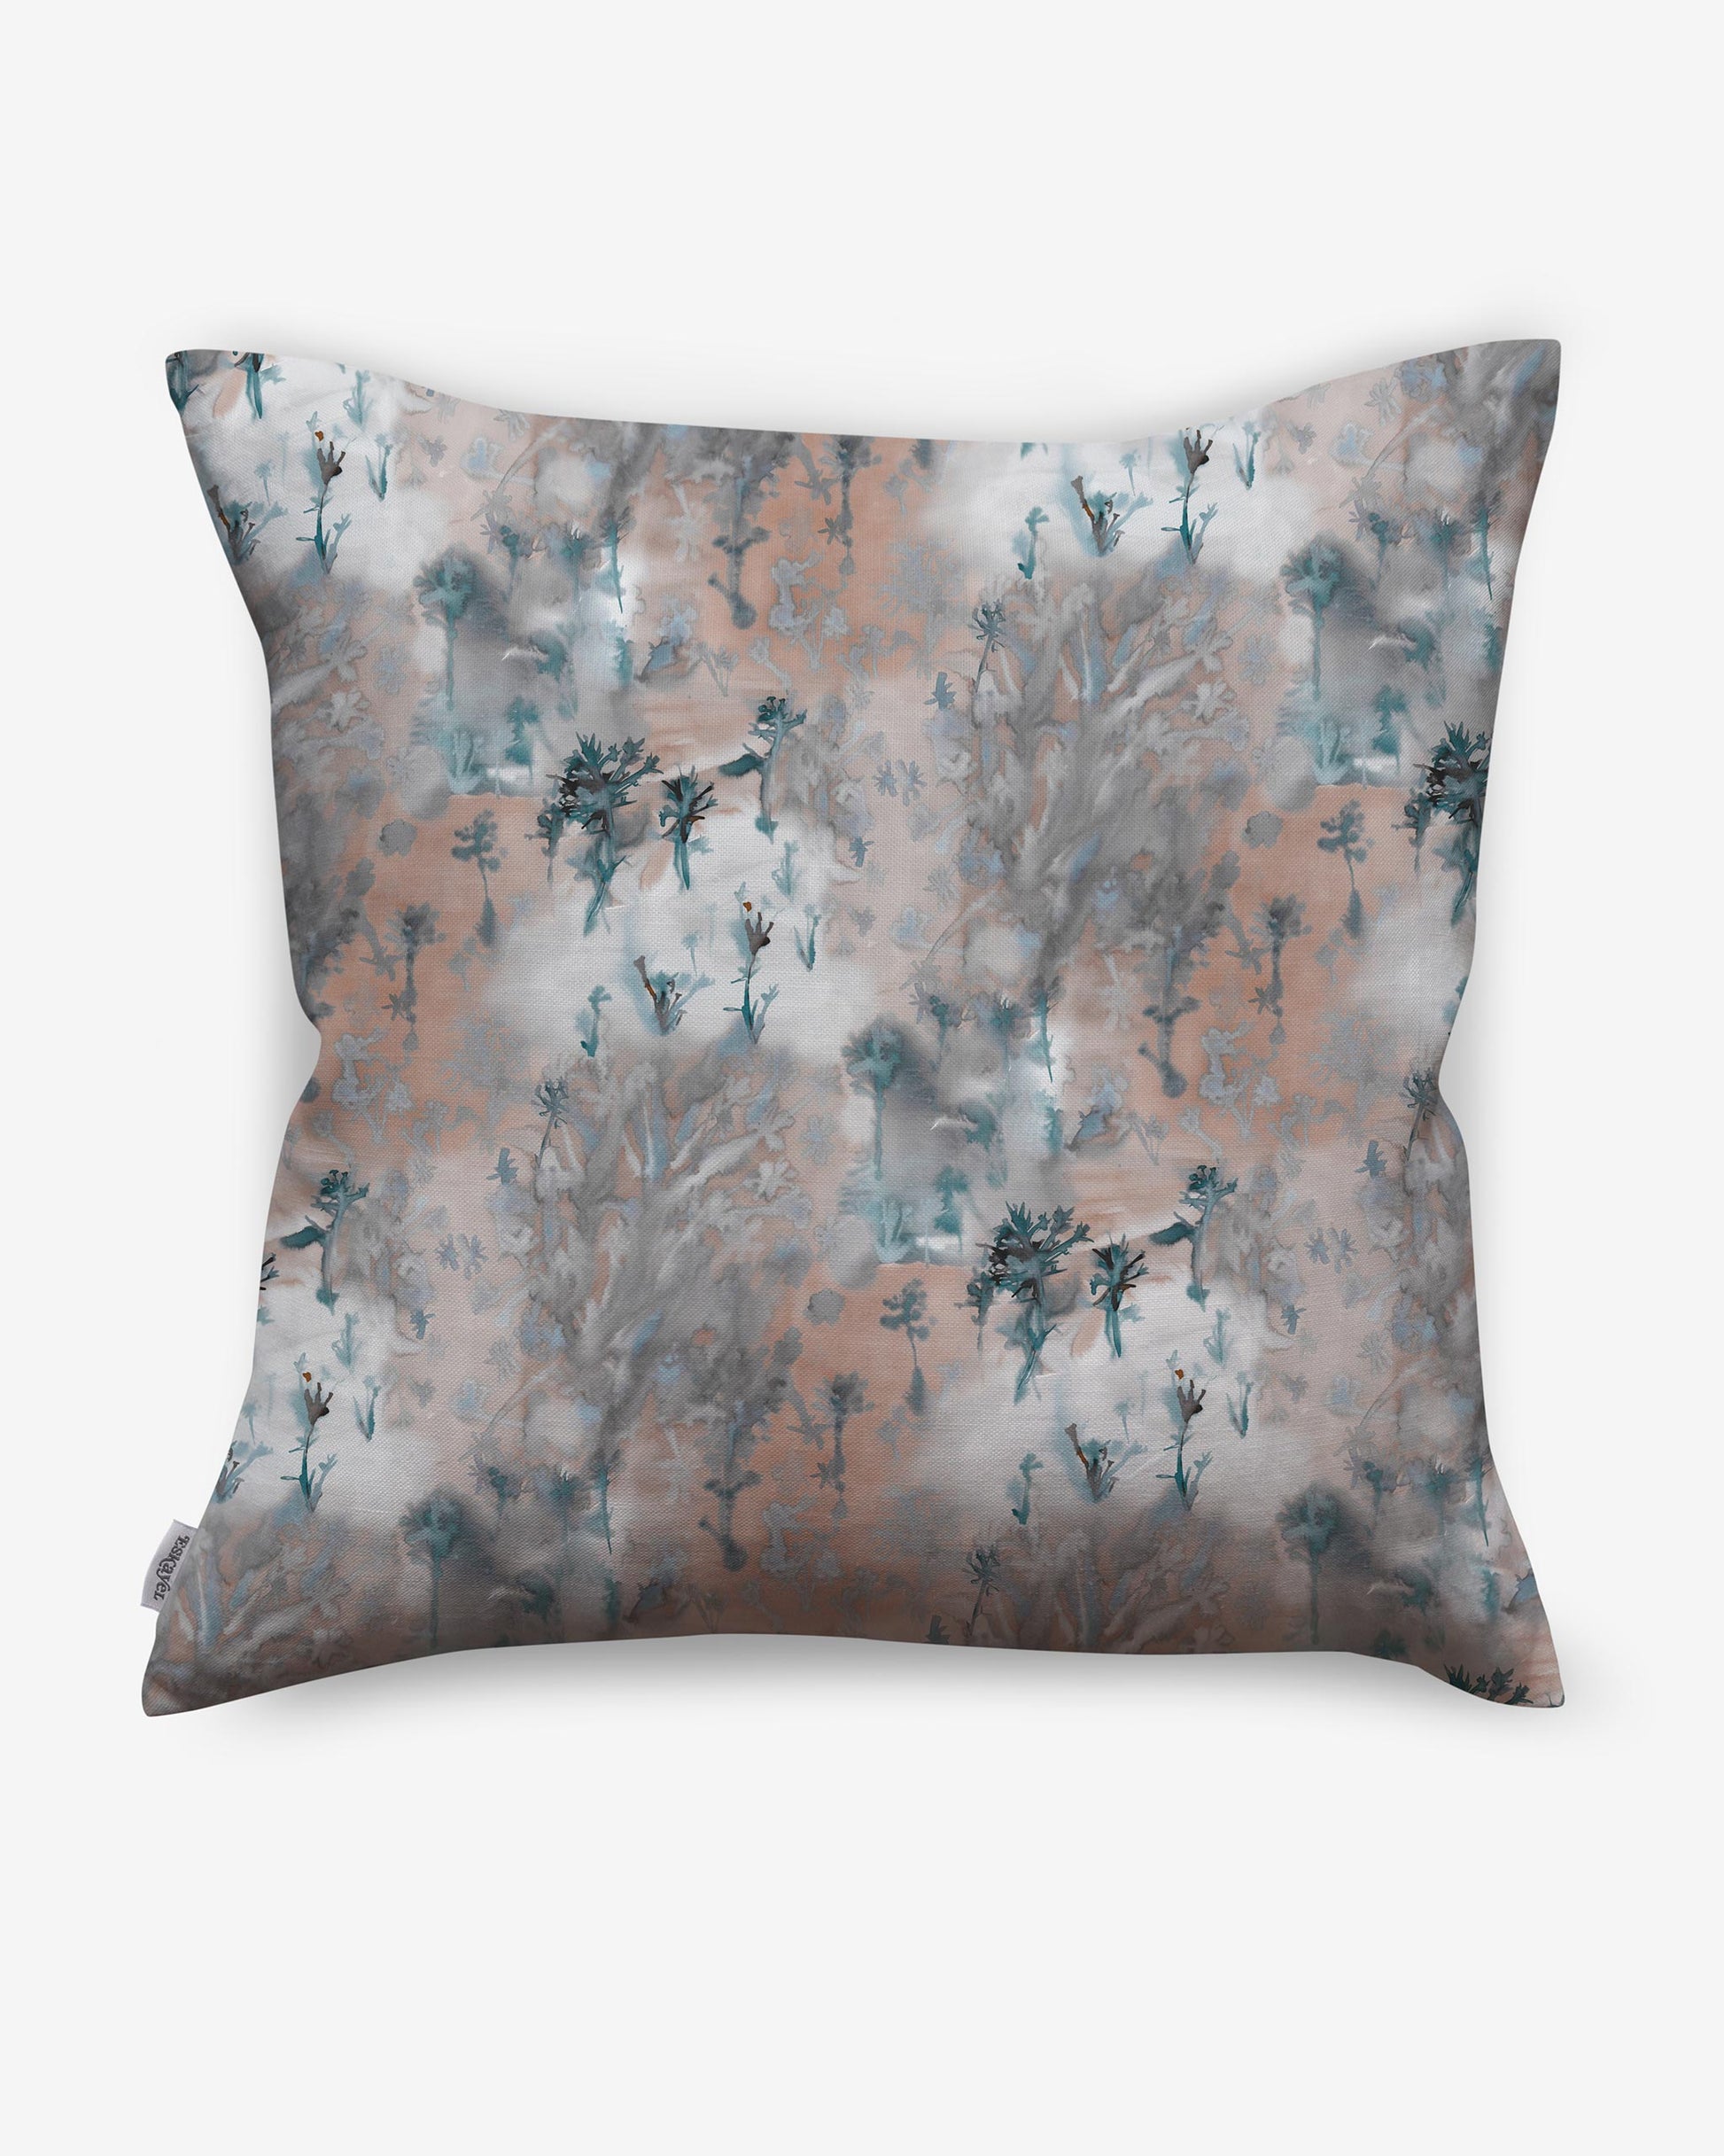 A cushion with a luxury fabric and Emvasia Pillow Isthmus pattern